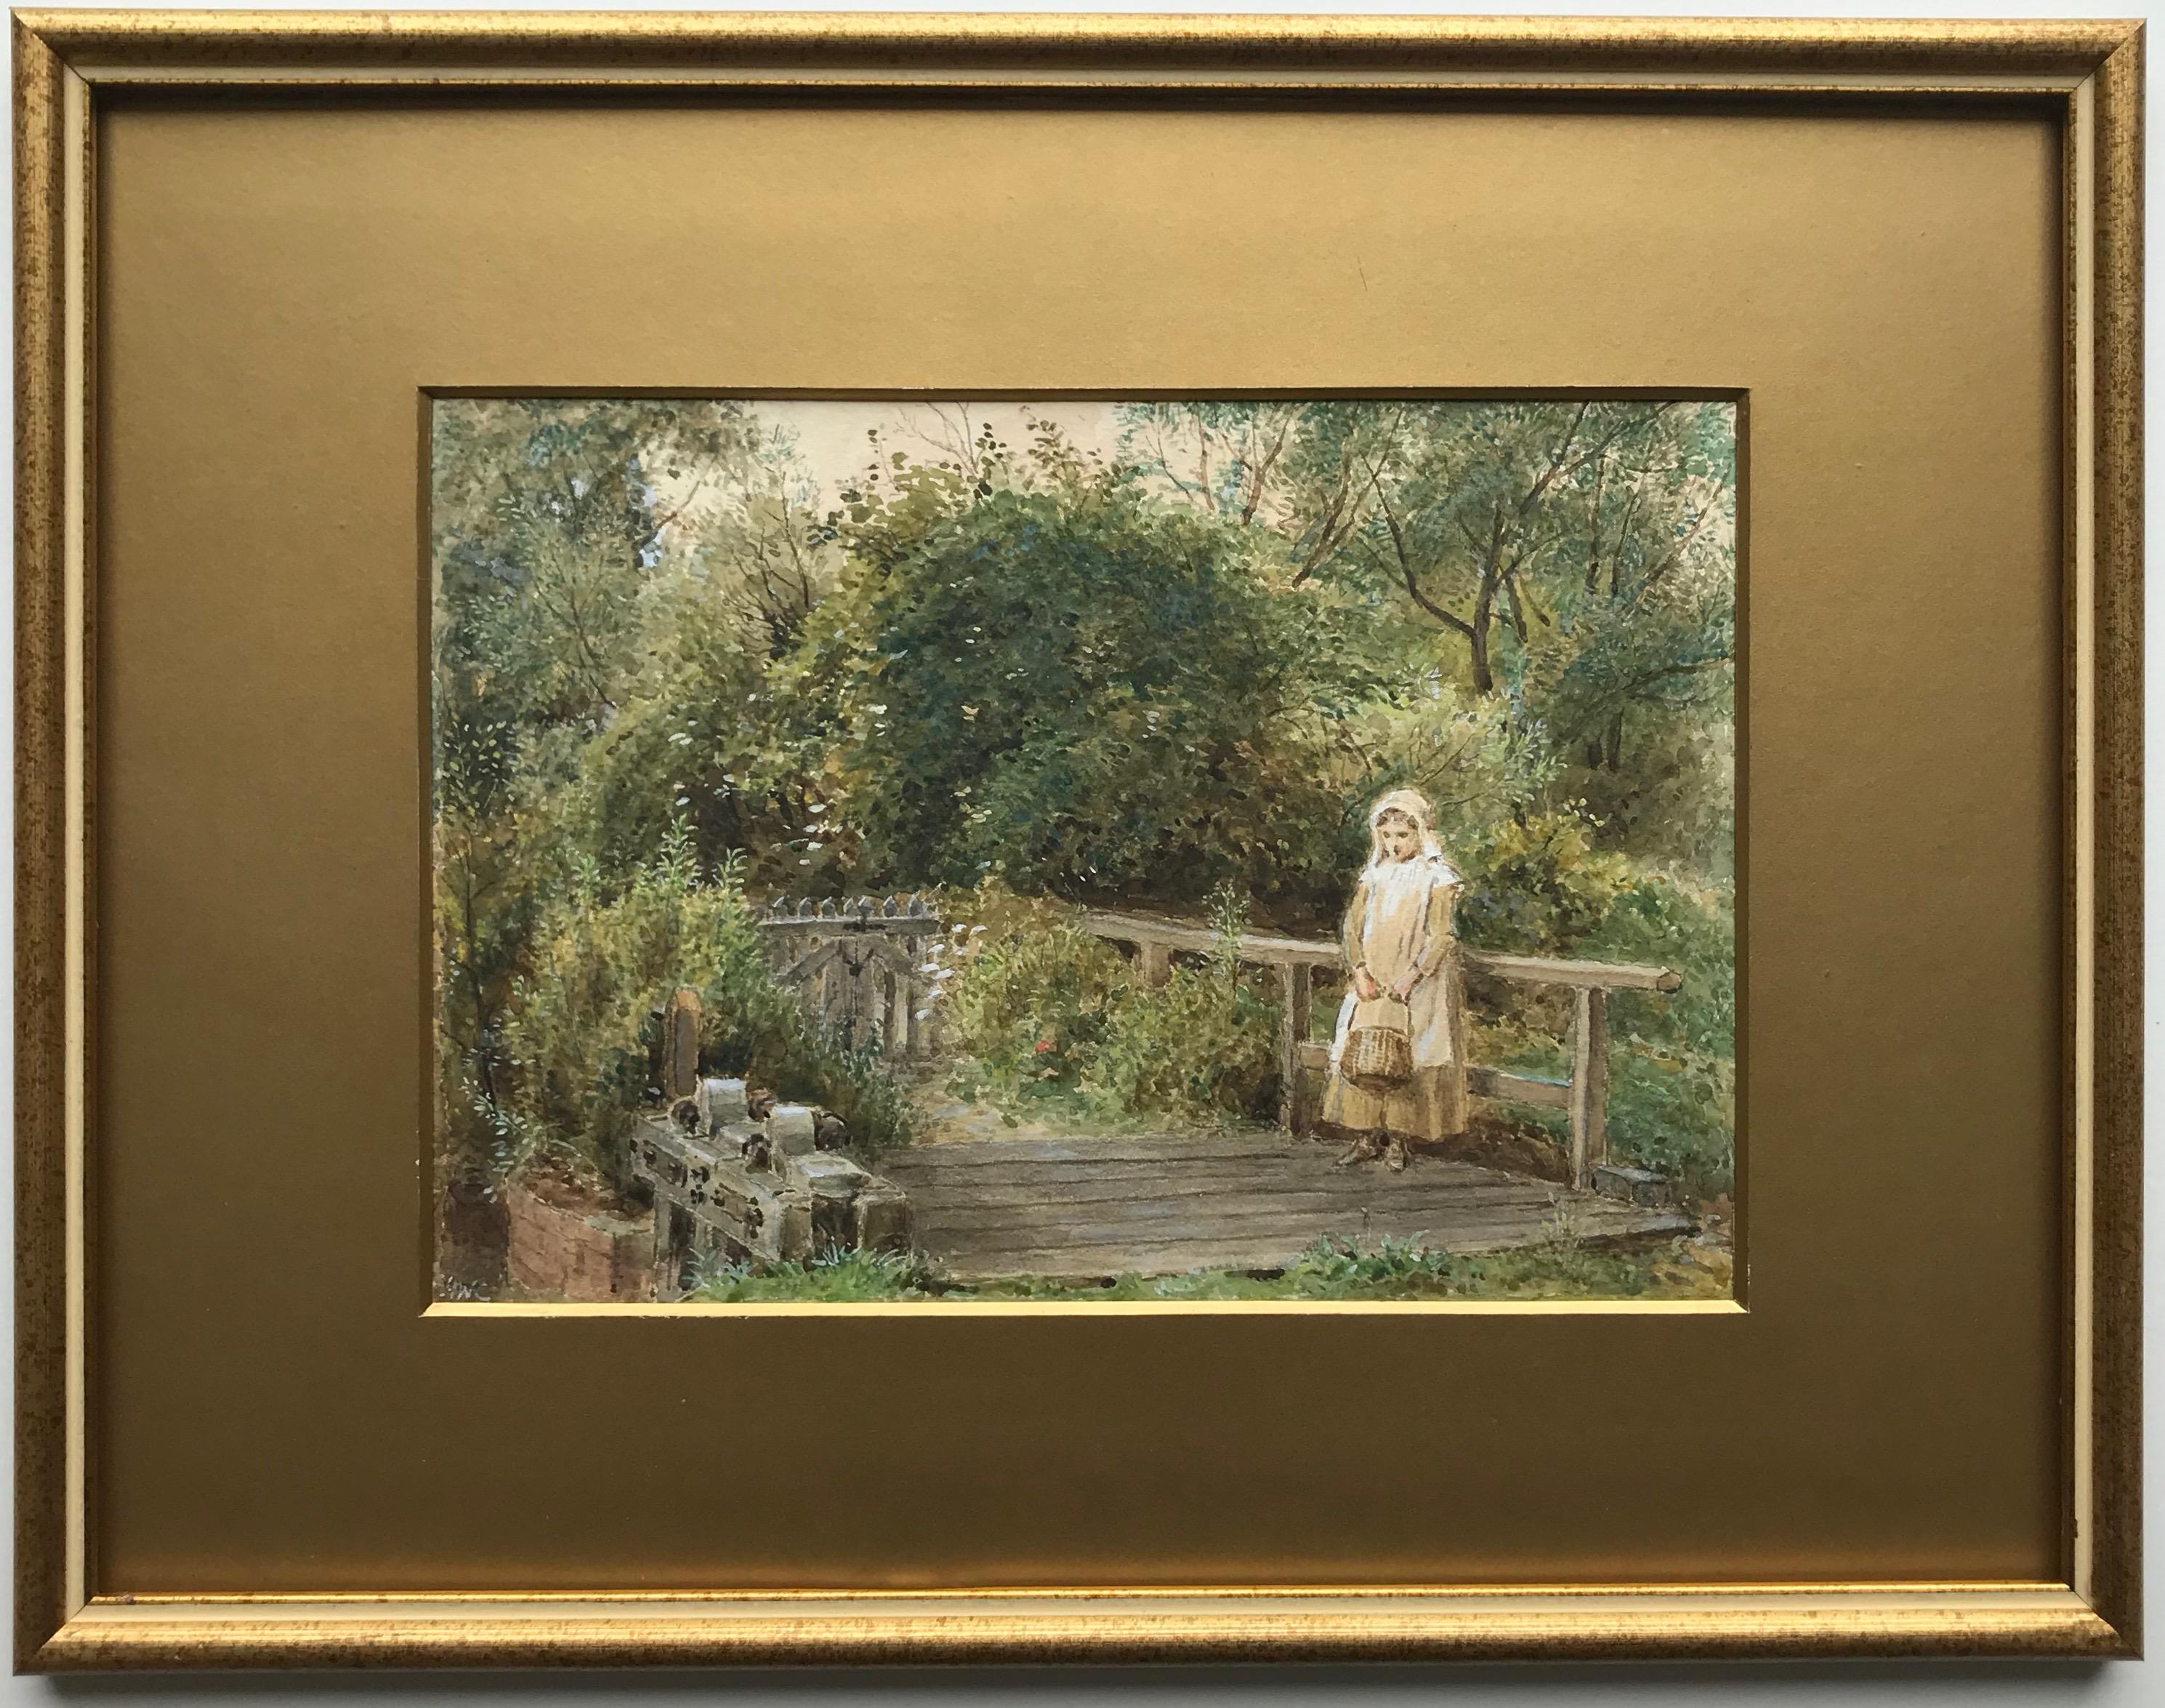 Alfred W Cooper, 19th Century
Waiting by the weir
Signed with initials
Watercolour with touches of gouache
6¾ x 9¾ inches
12 x 16 inches with the frame

A delightful Victorian scene with a young maiden waiting with her basket by the weir. Superbly